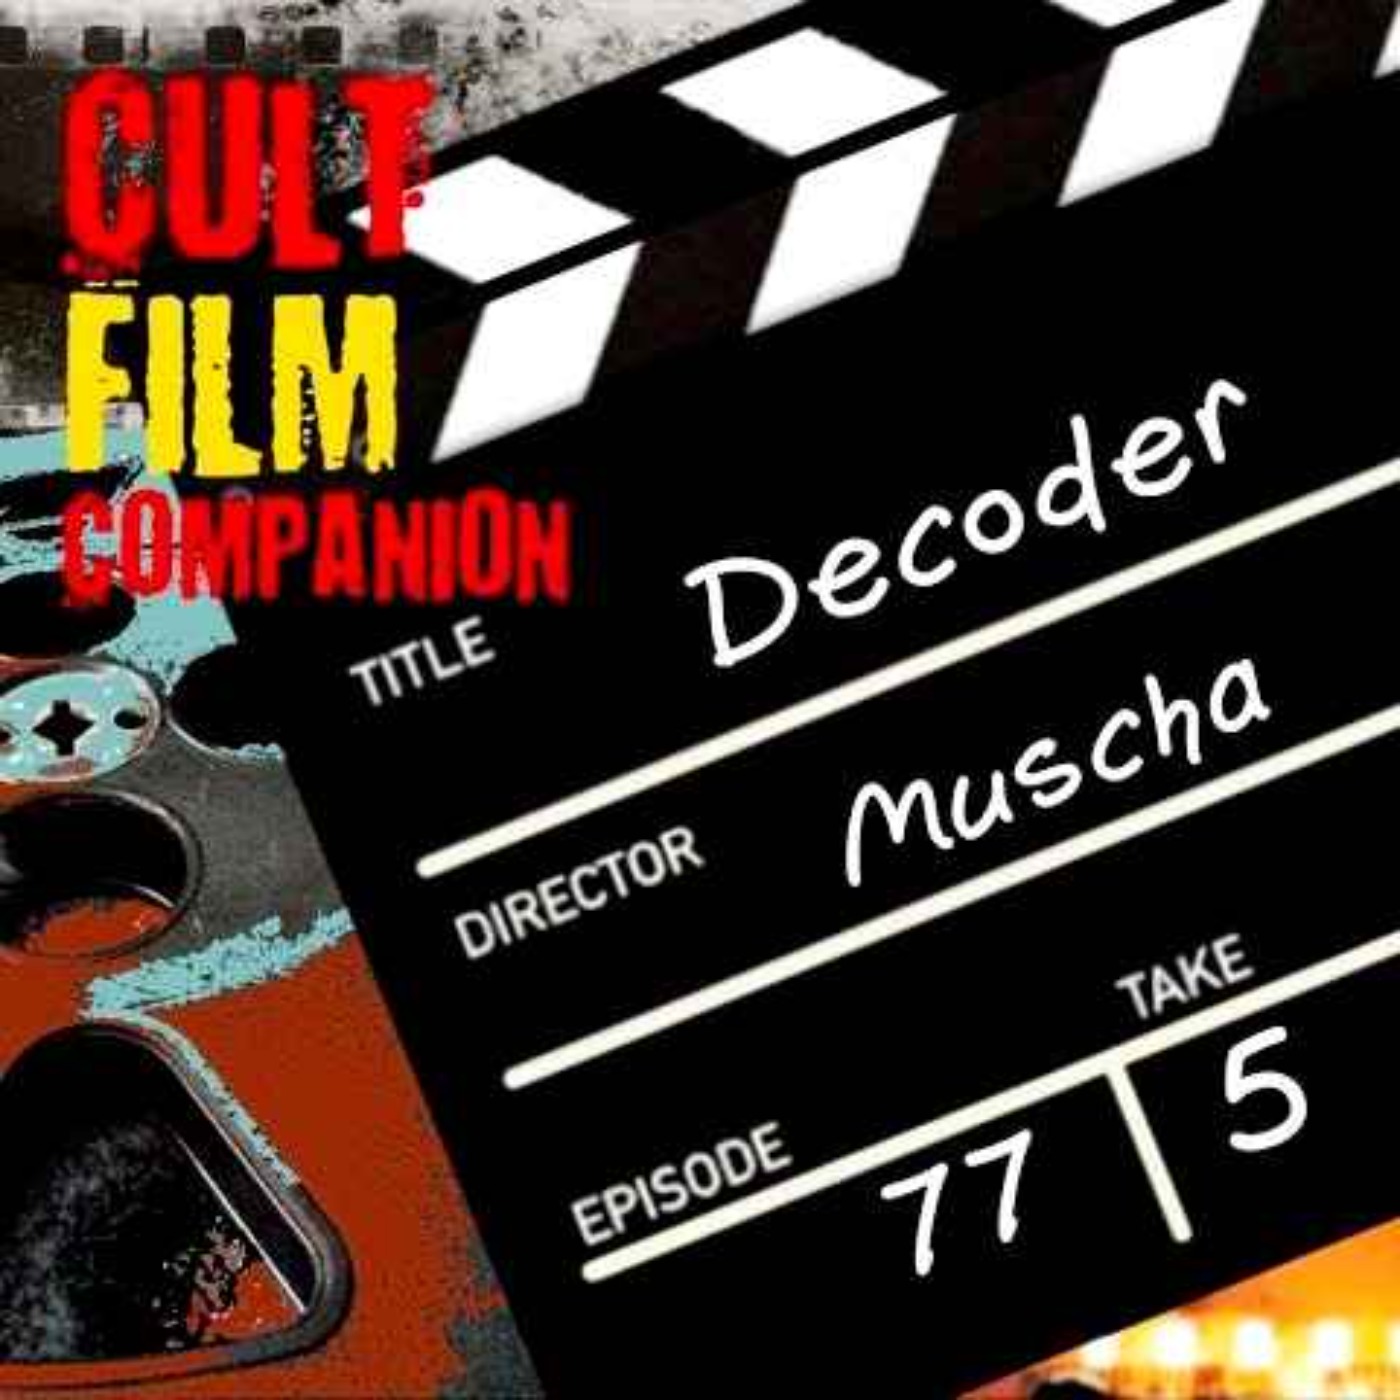 Ep. 77 Decoder directed by  Muscha